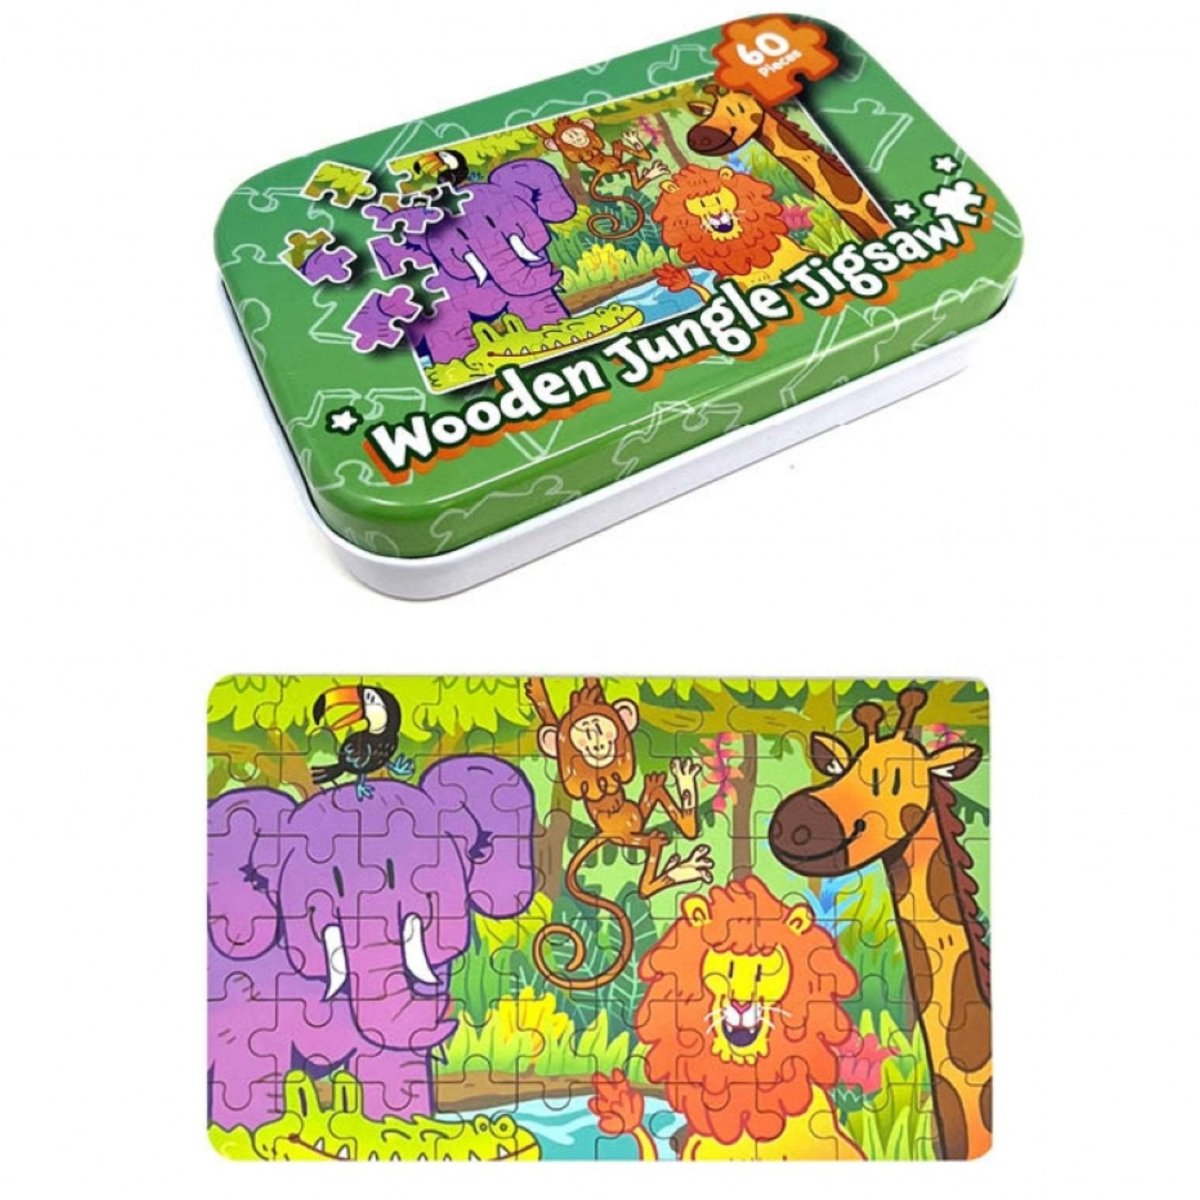 Wooden Jungle 60 piece Jigsaw in Tin - Kids Party Craft